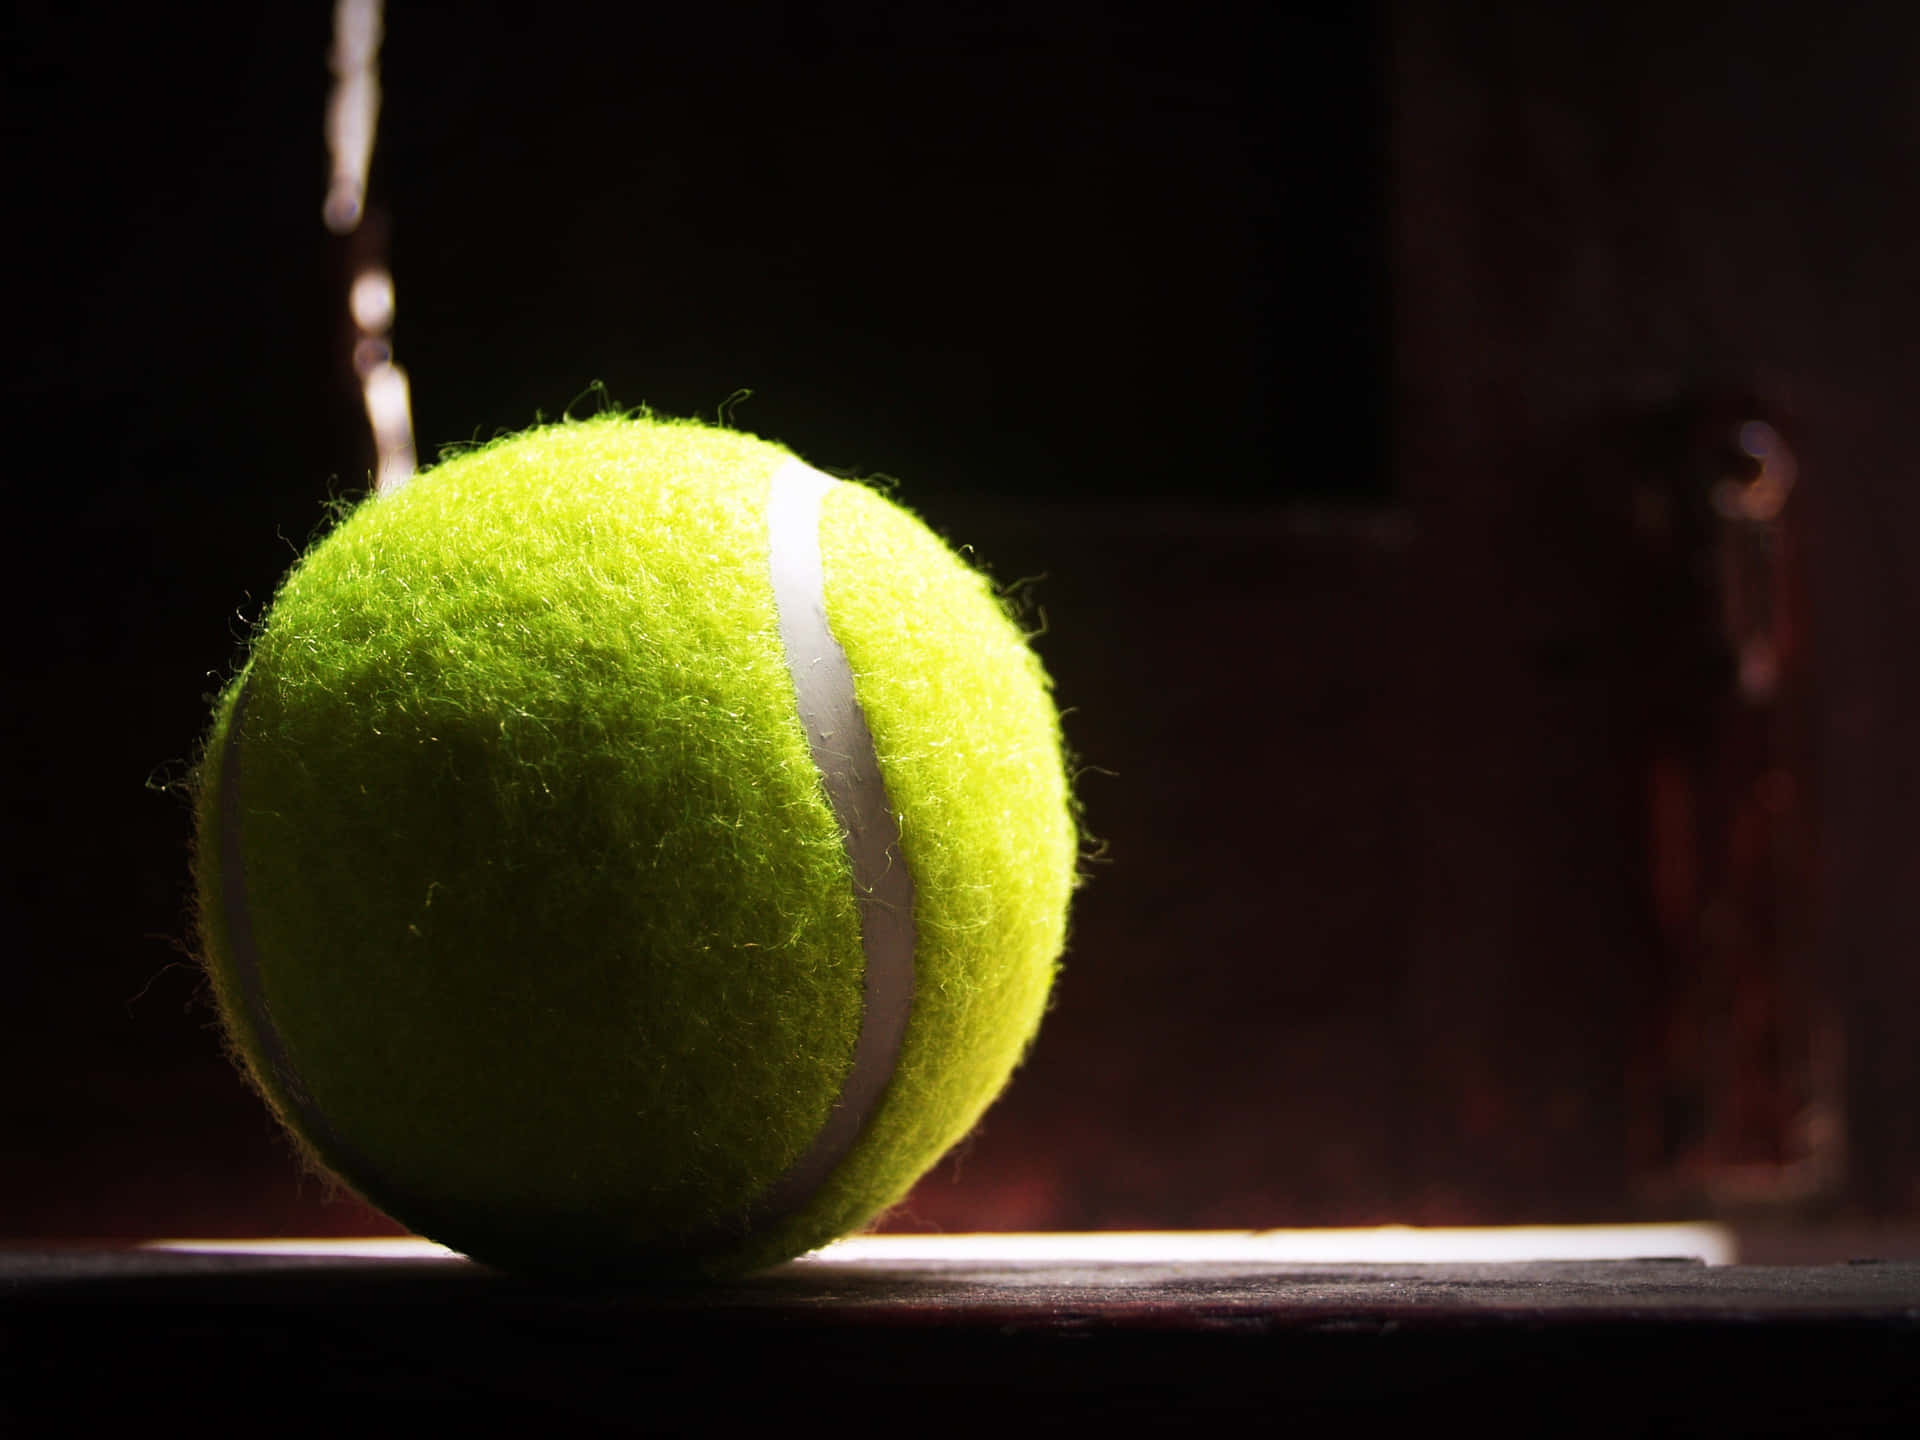 Description- Tennis ball flying in a slow-motion, blurred background - representing a victorious moment. Wallpaper